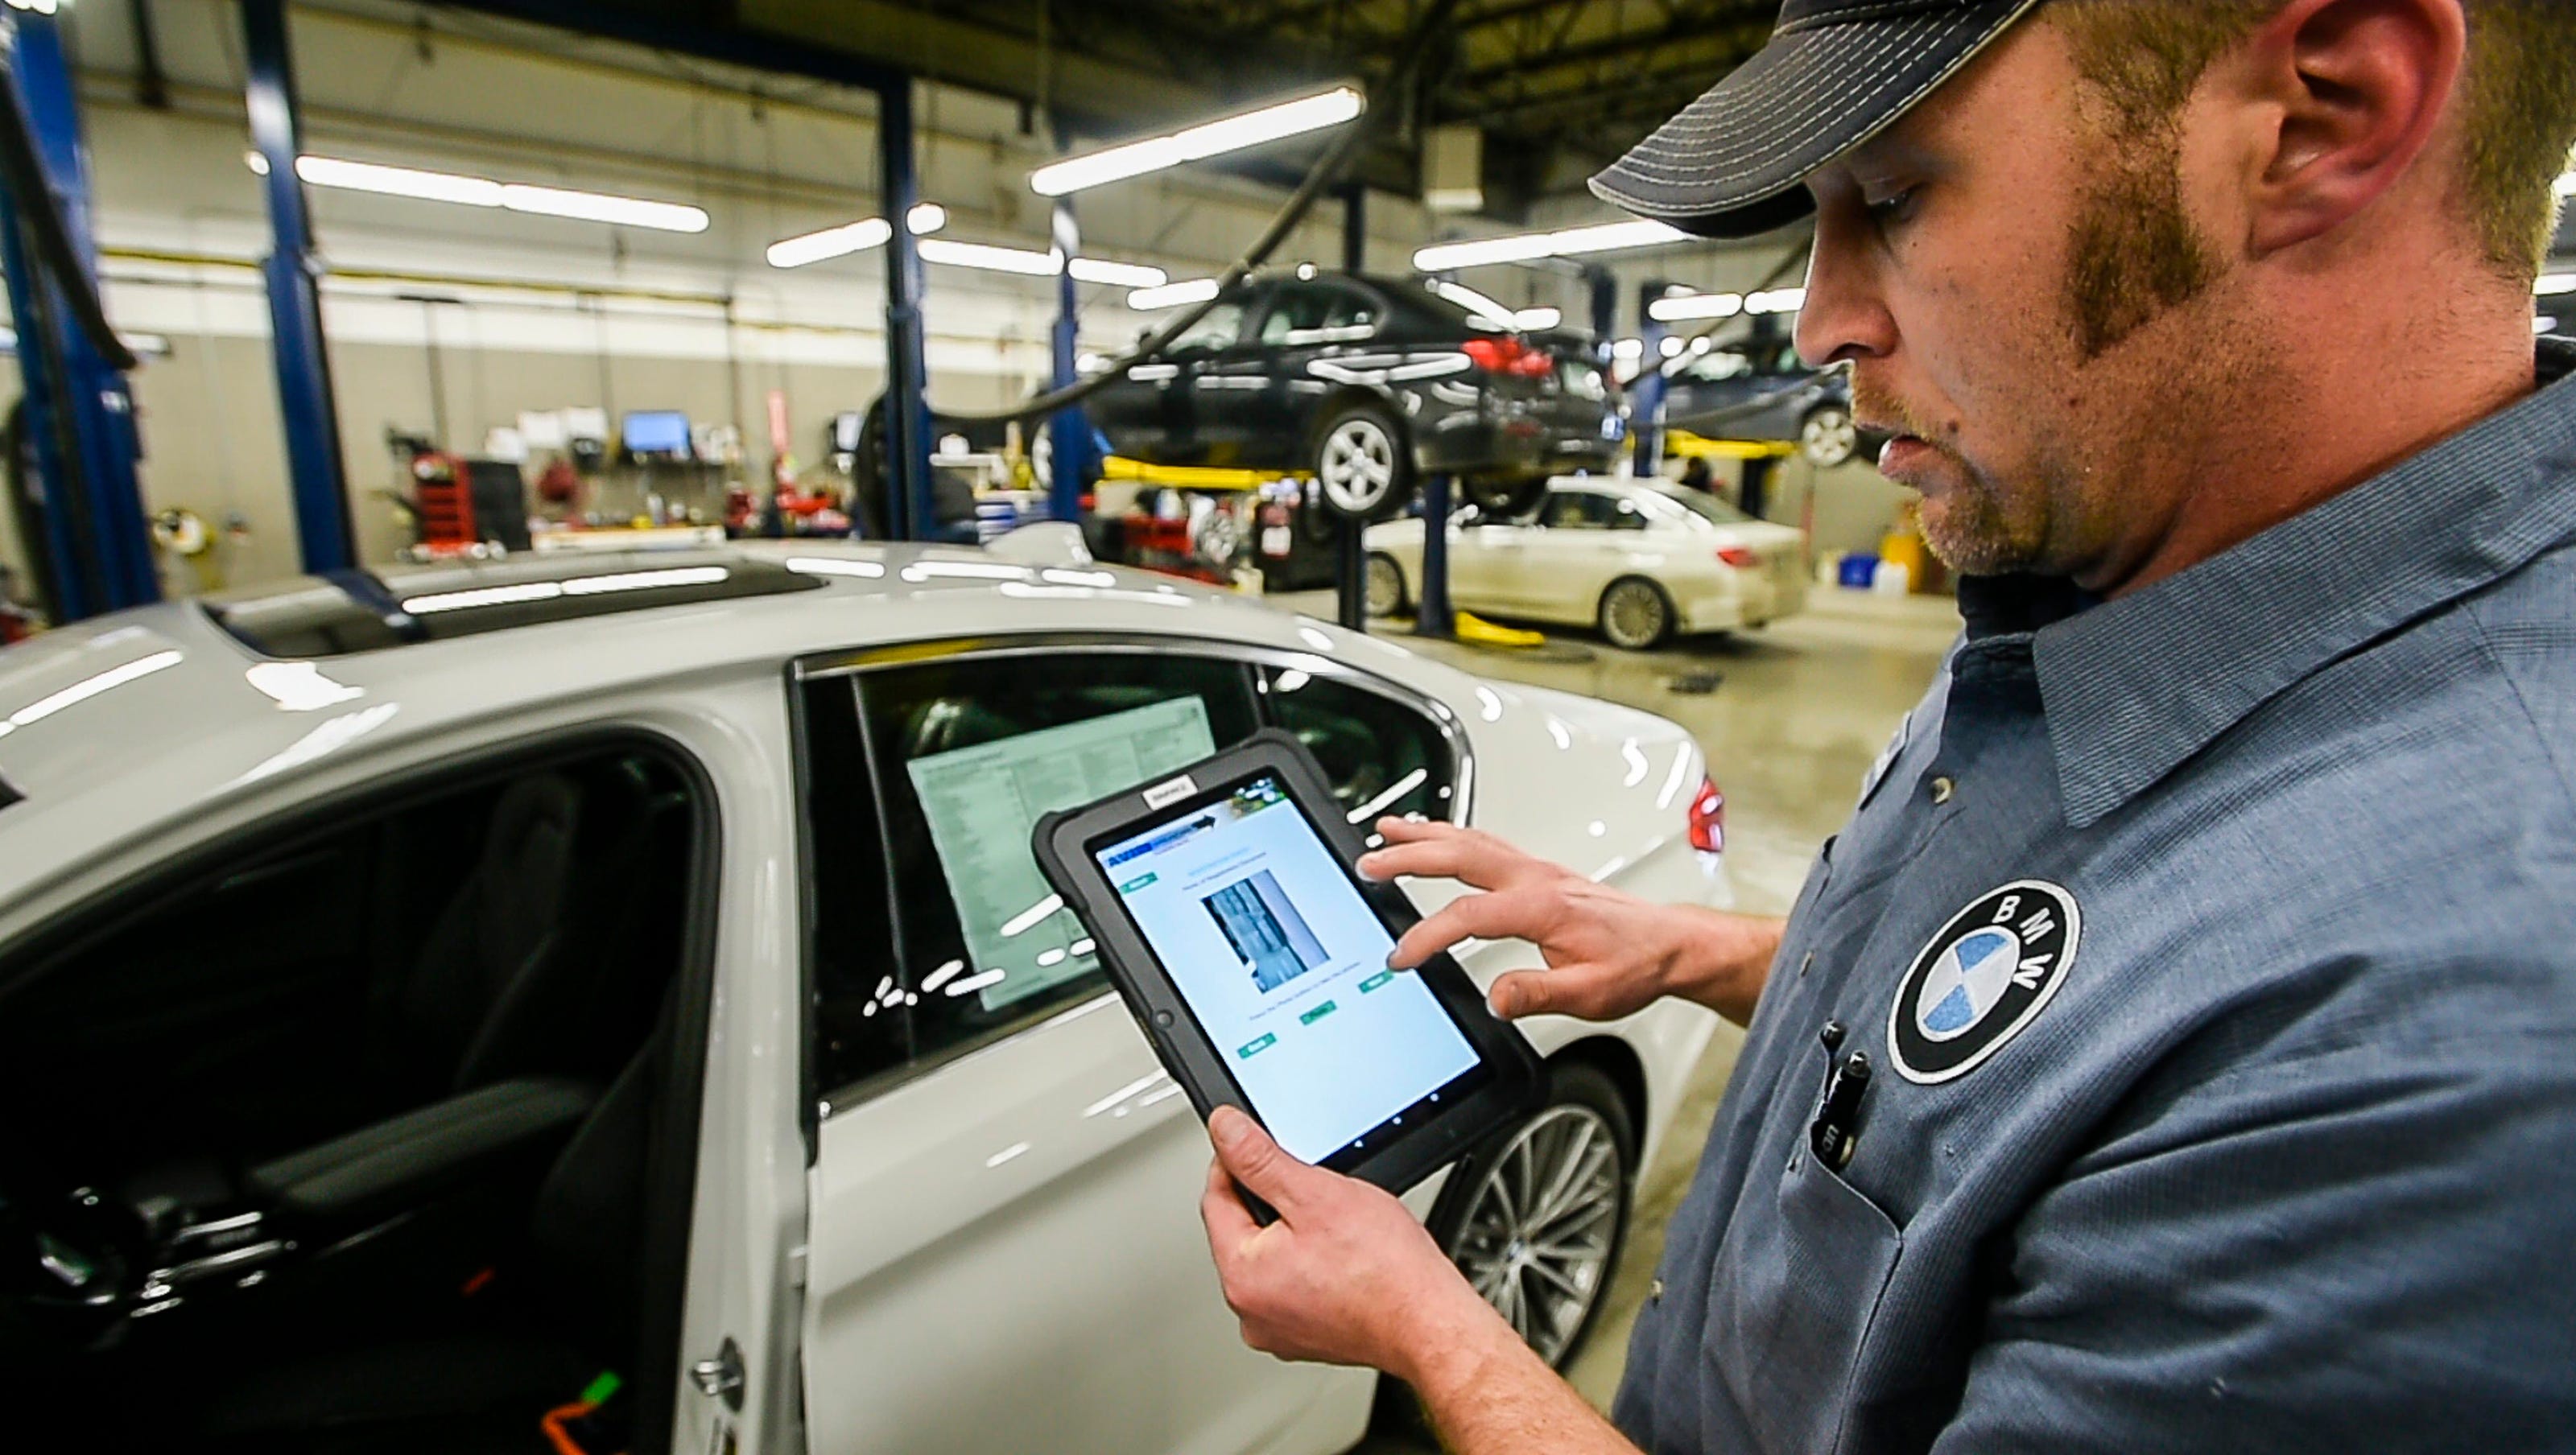 vt-car-inspections-are-going-digital-at-a-cost